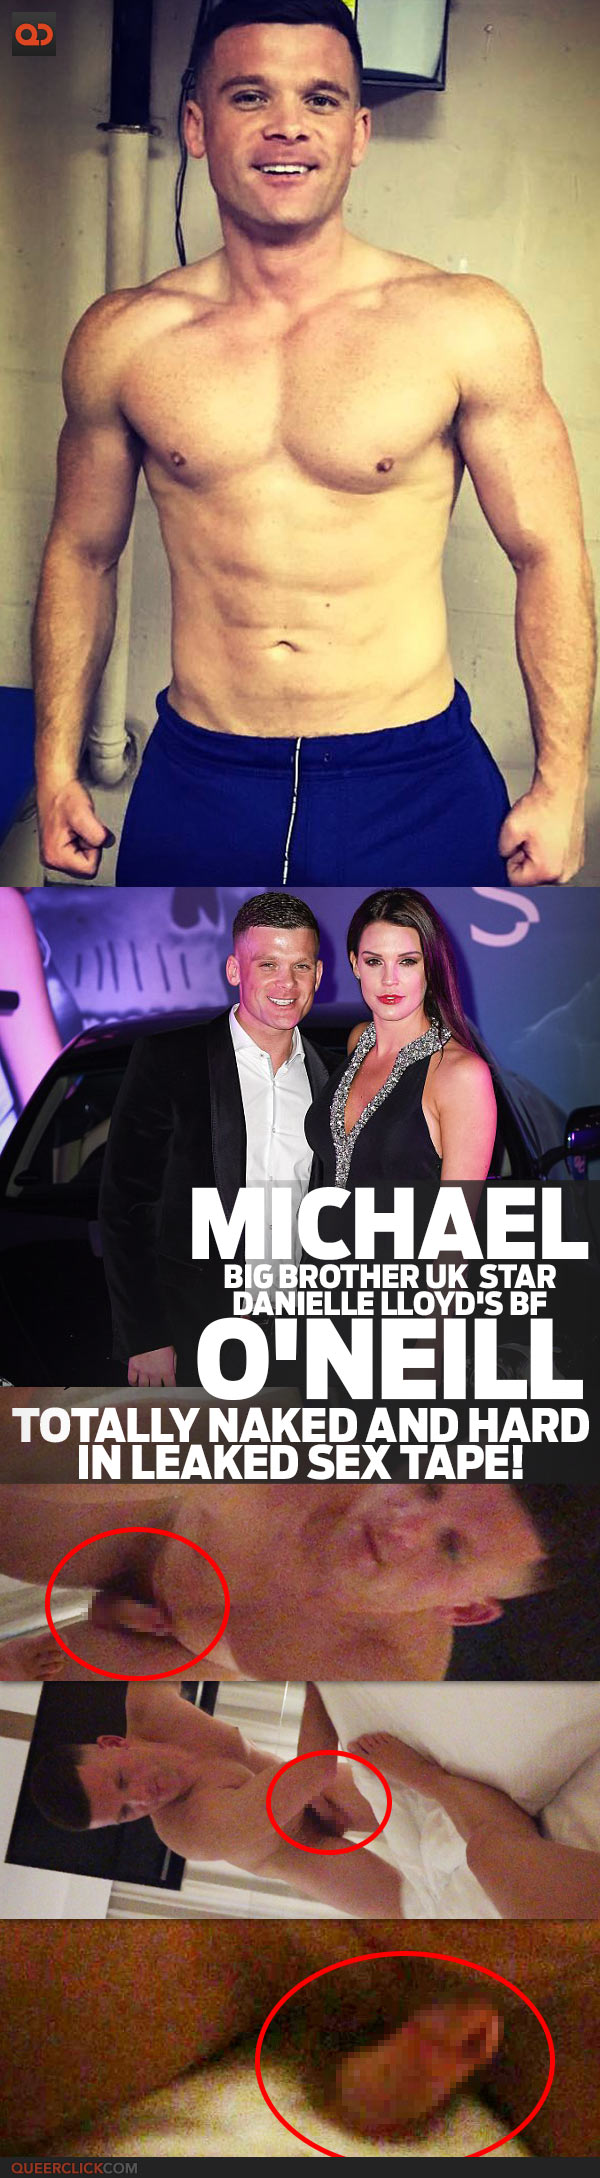 Big Brother Star Sex Tape - Michael O'Neill, Big Brother Star Danielle Lloyd's BF, Totally Naked And  Hard In Leaked Sex Tape! - QueerClick